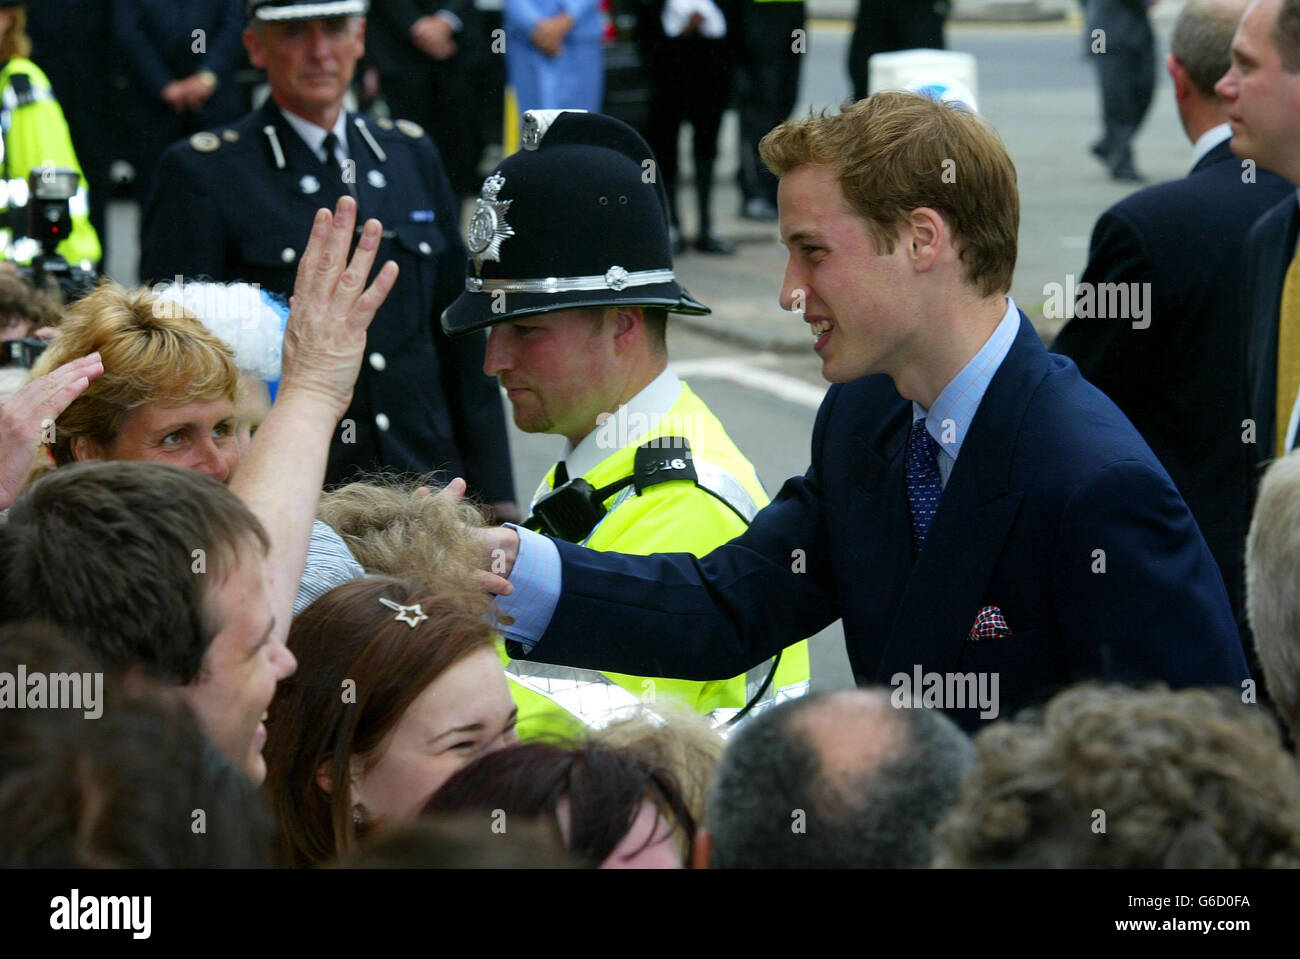 Prince William meets members of the public as he arrives at NASH (Newport Action for Single Homeless) in Newport South Wales, with his father Prince Charles.The visit was one of several arranged across the principality to mark the young prince's 21st birthday. Stock Photo